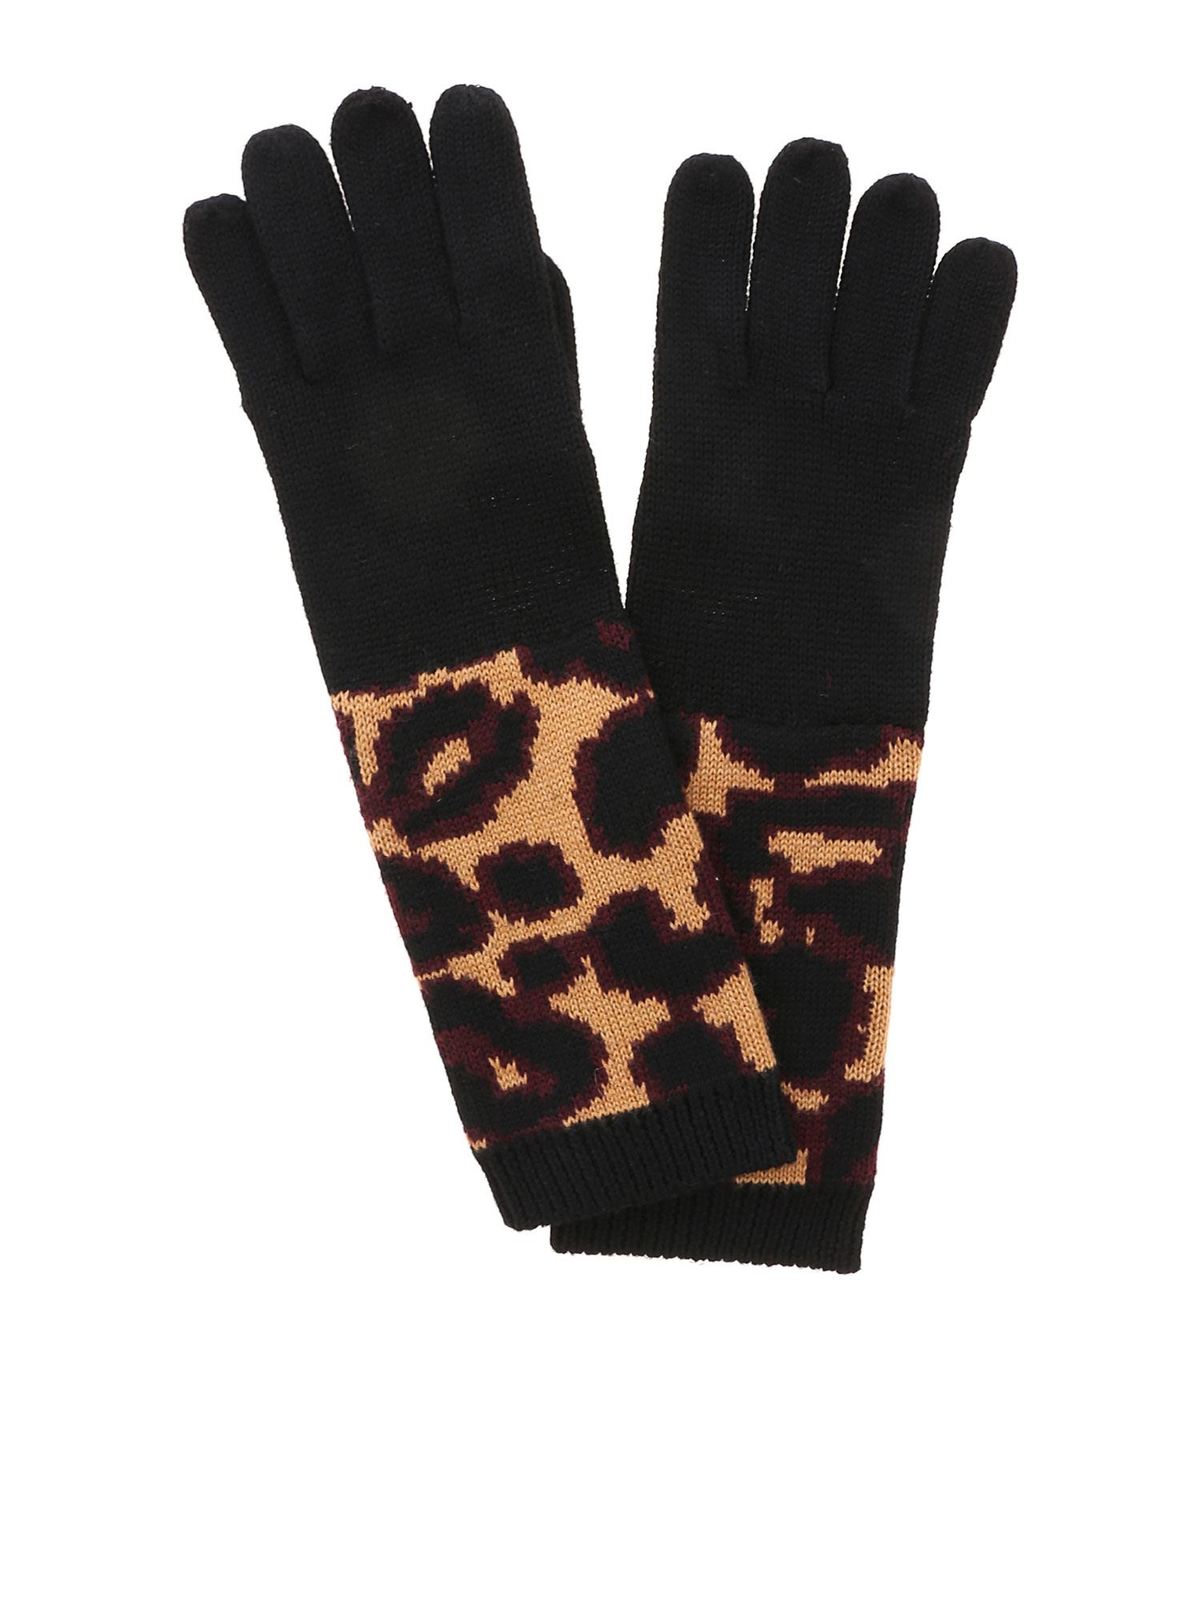 Lulu Guinness Wild Cat Gloves In Black And Animal Print